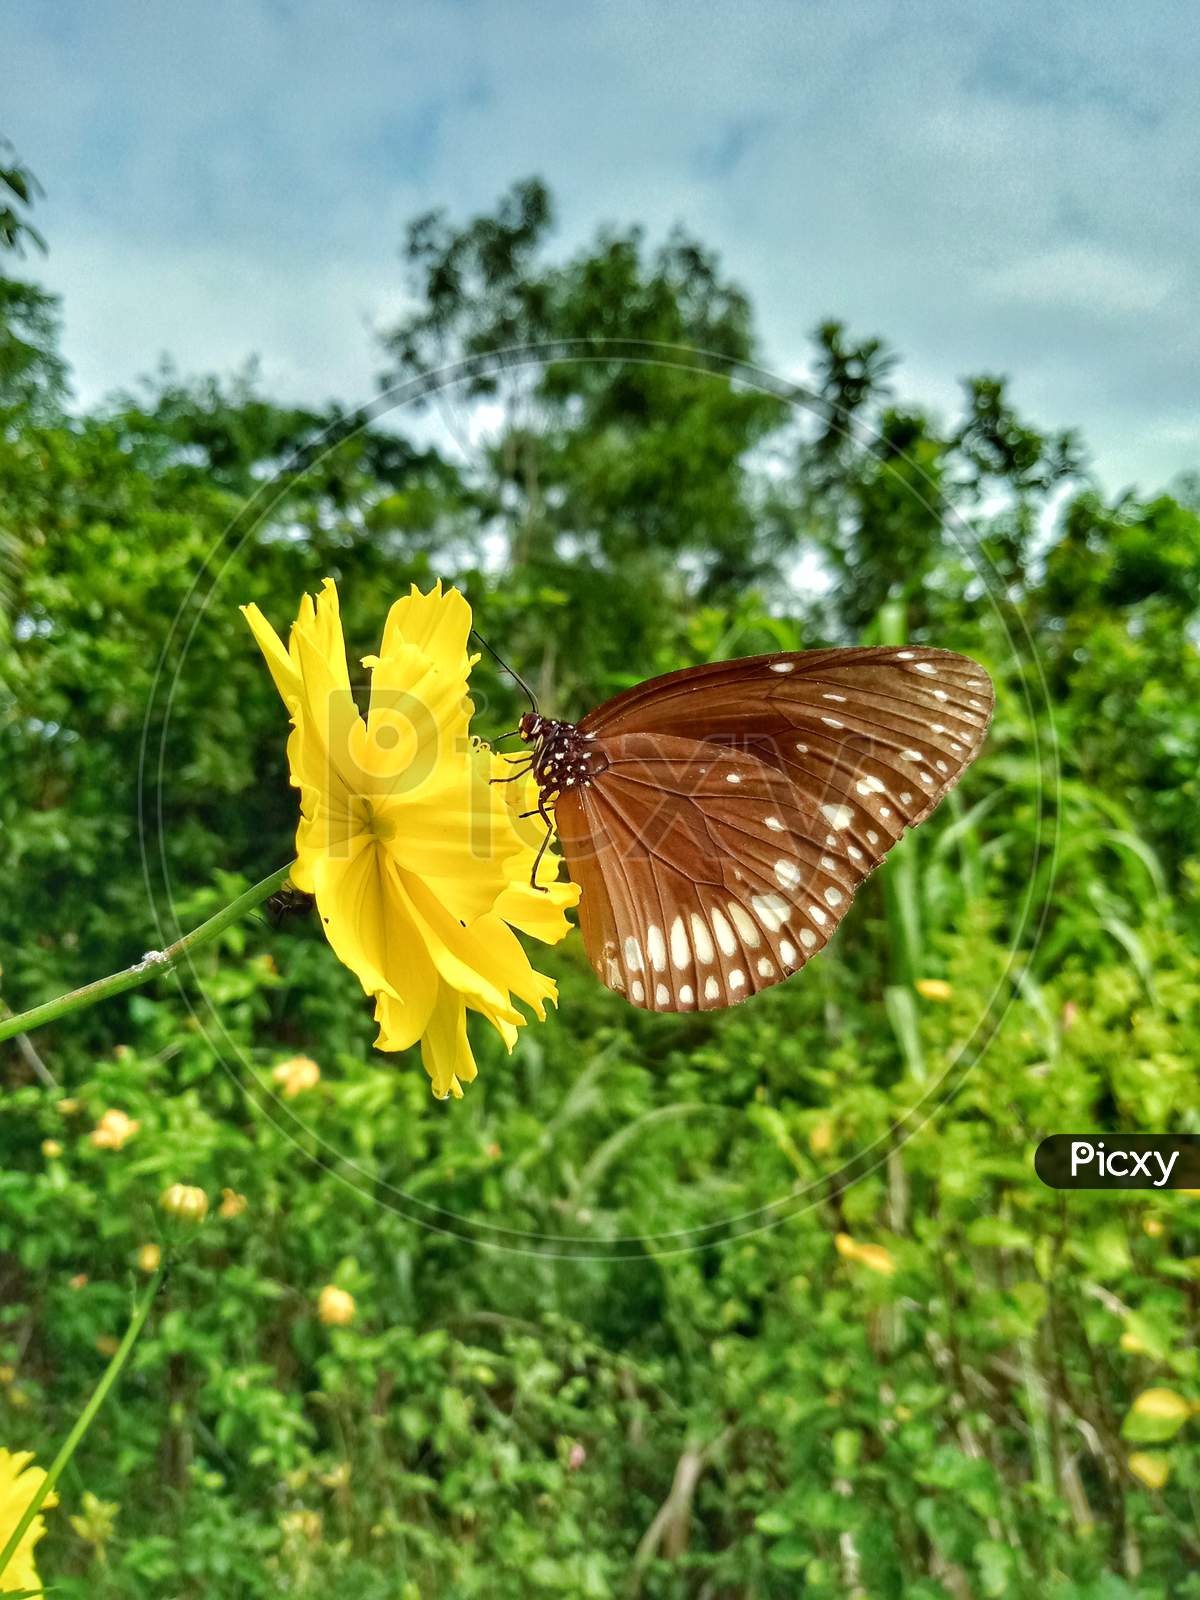 The butterfly is in search of Nectar